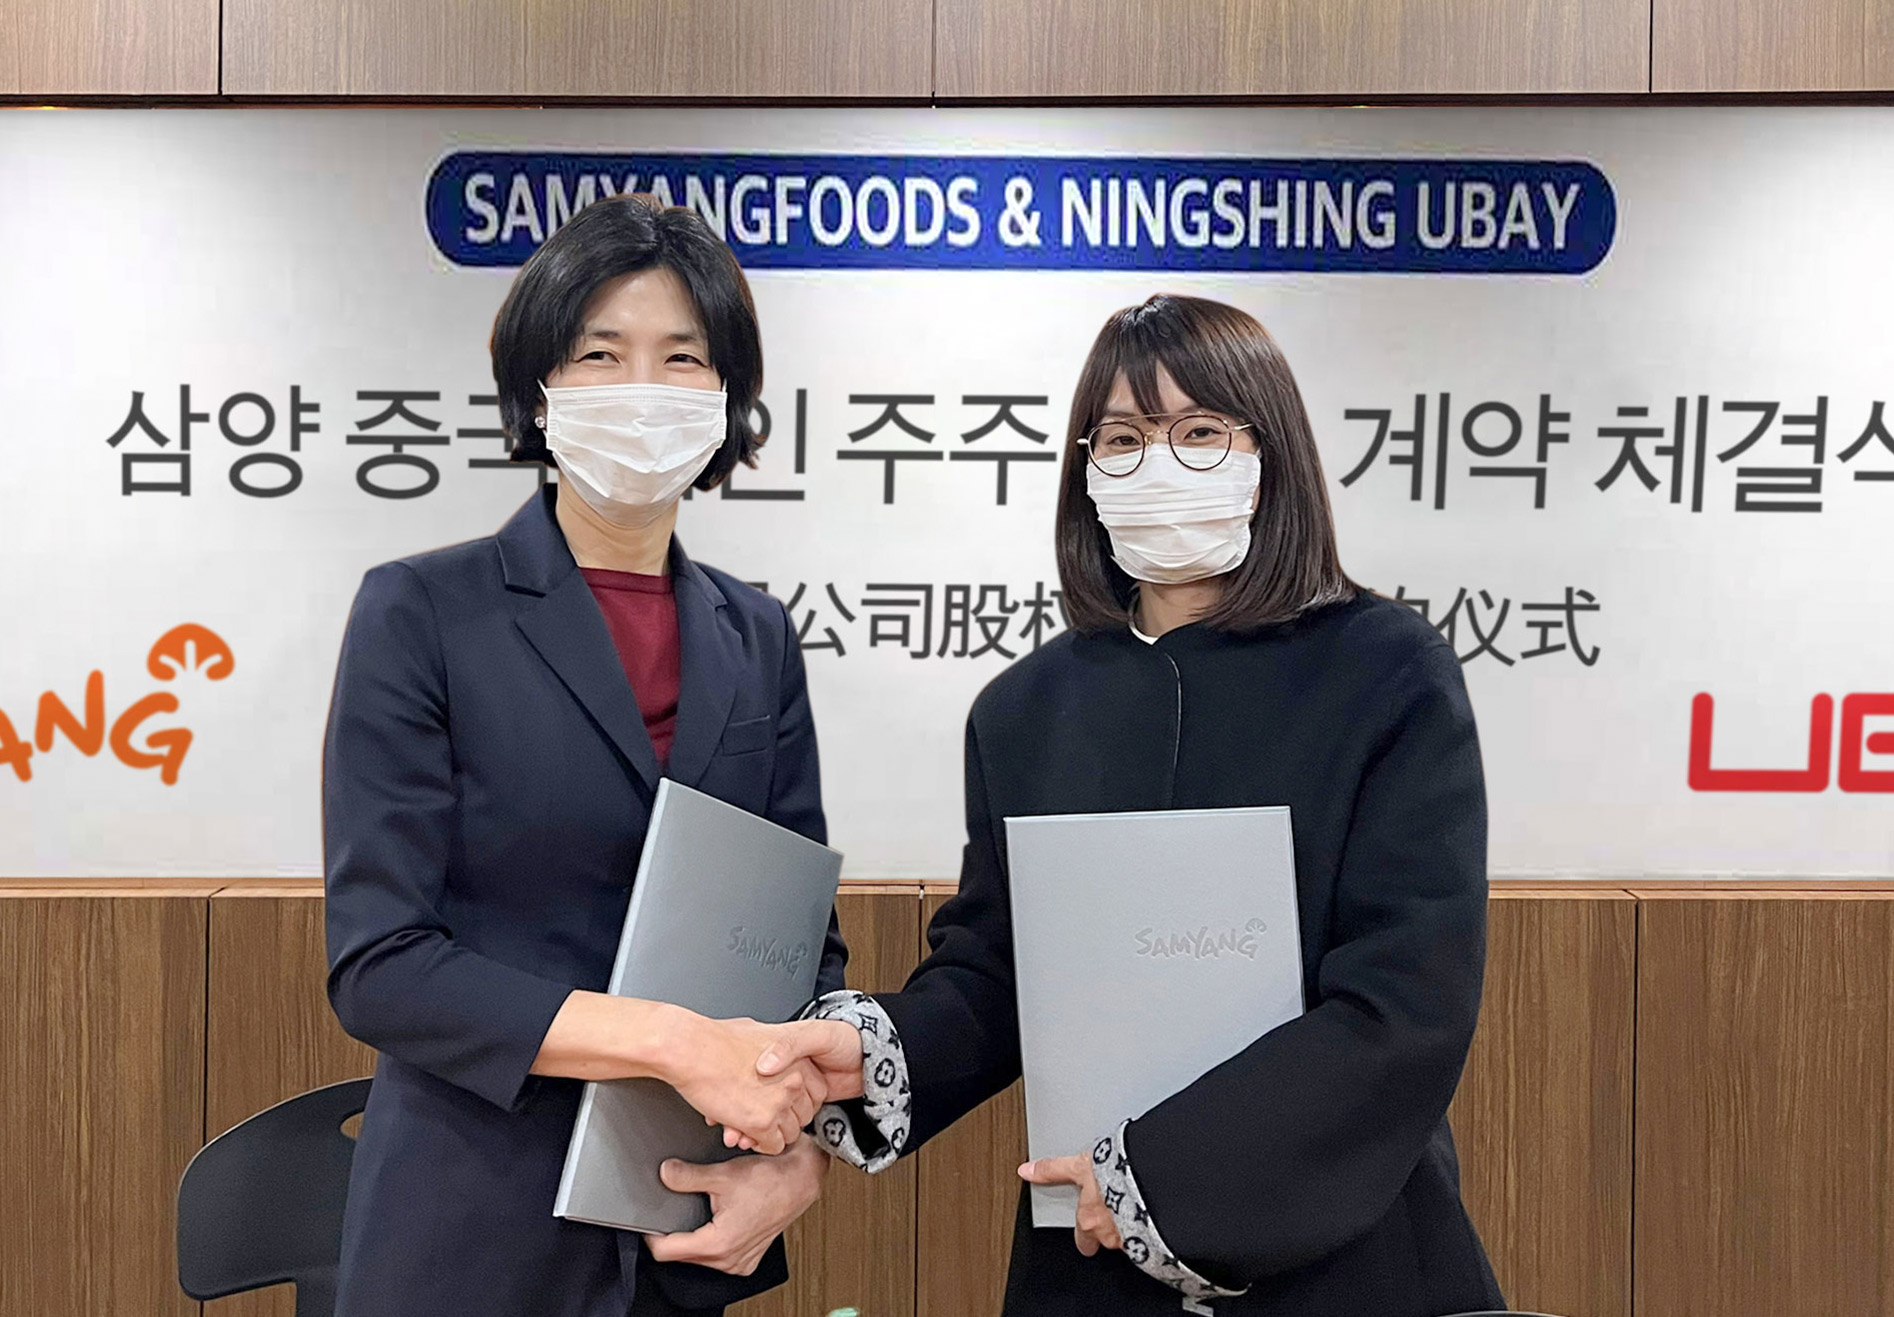 We got married -- Ningshing Ubay and Samyang Foods held the signing ceremony of Samyang China equity joint venture